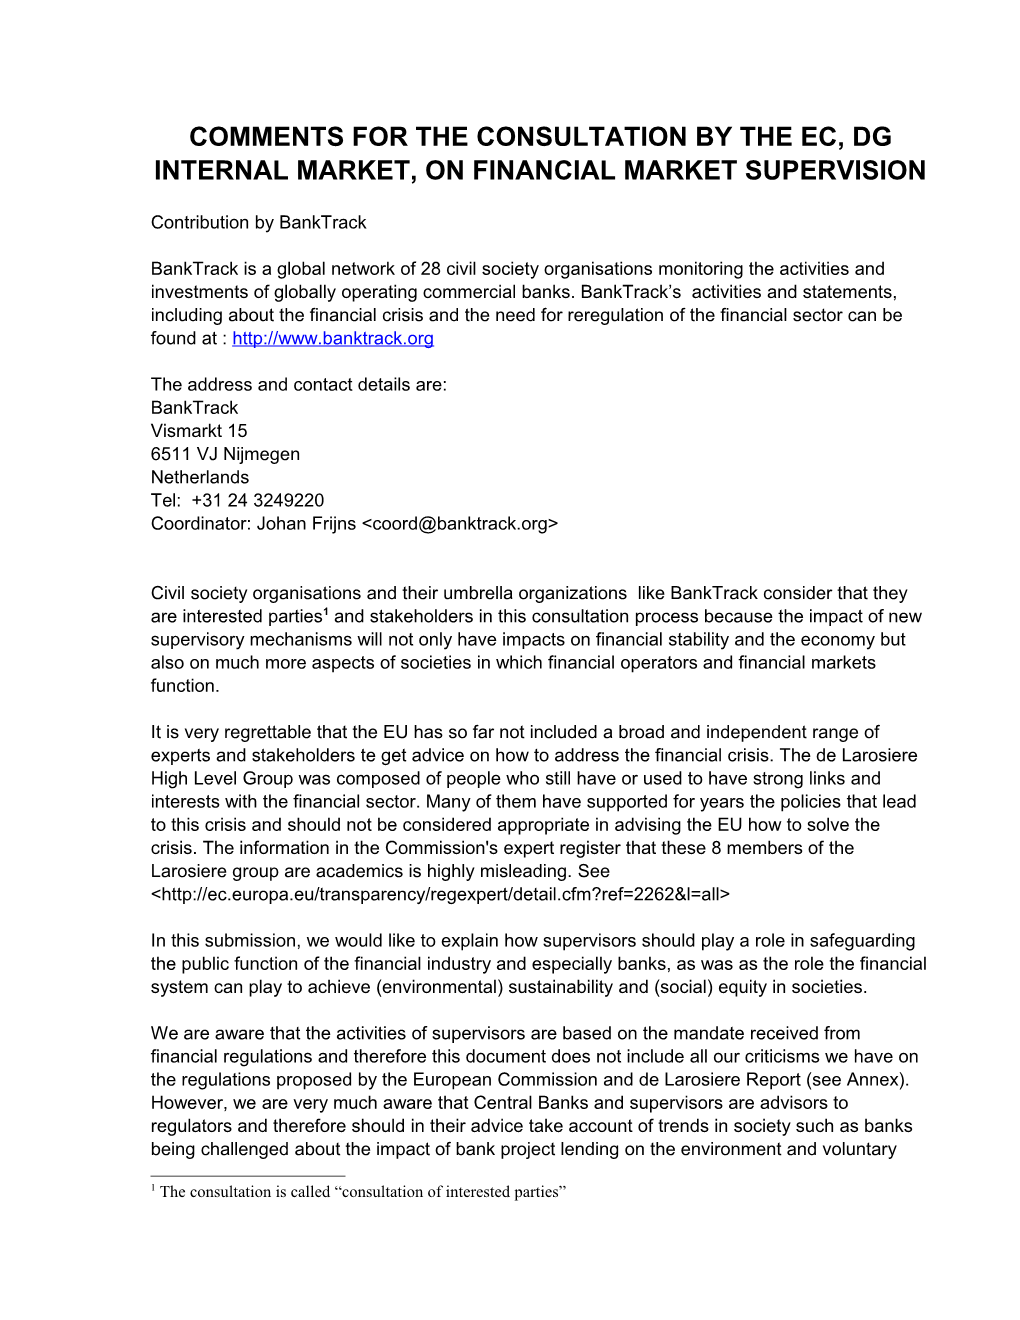 Supervisory Structure to Meet the Challenge of Complex International Financial Markets